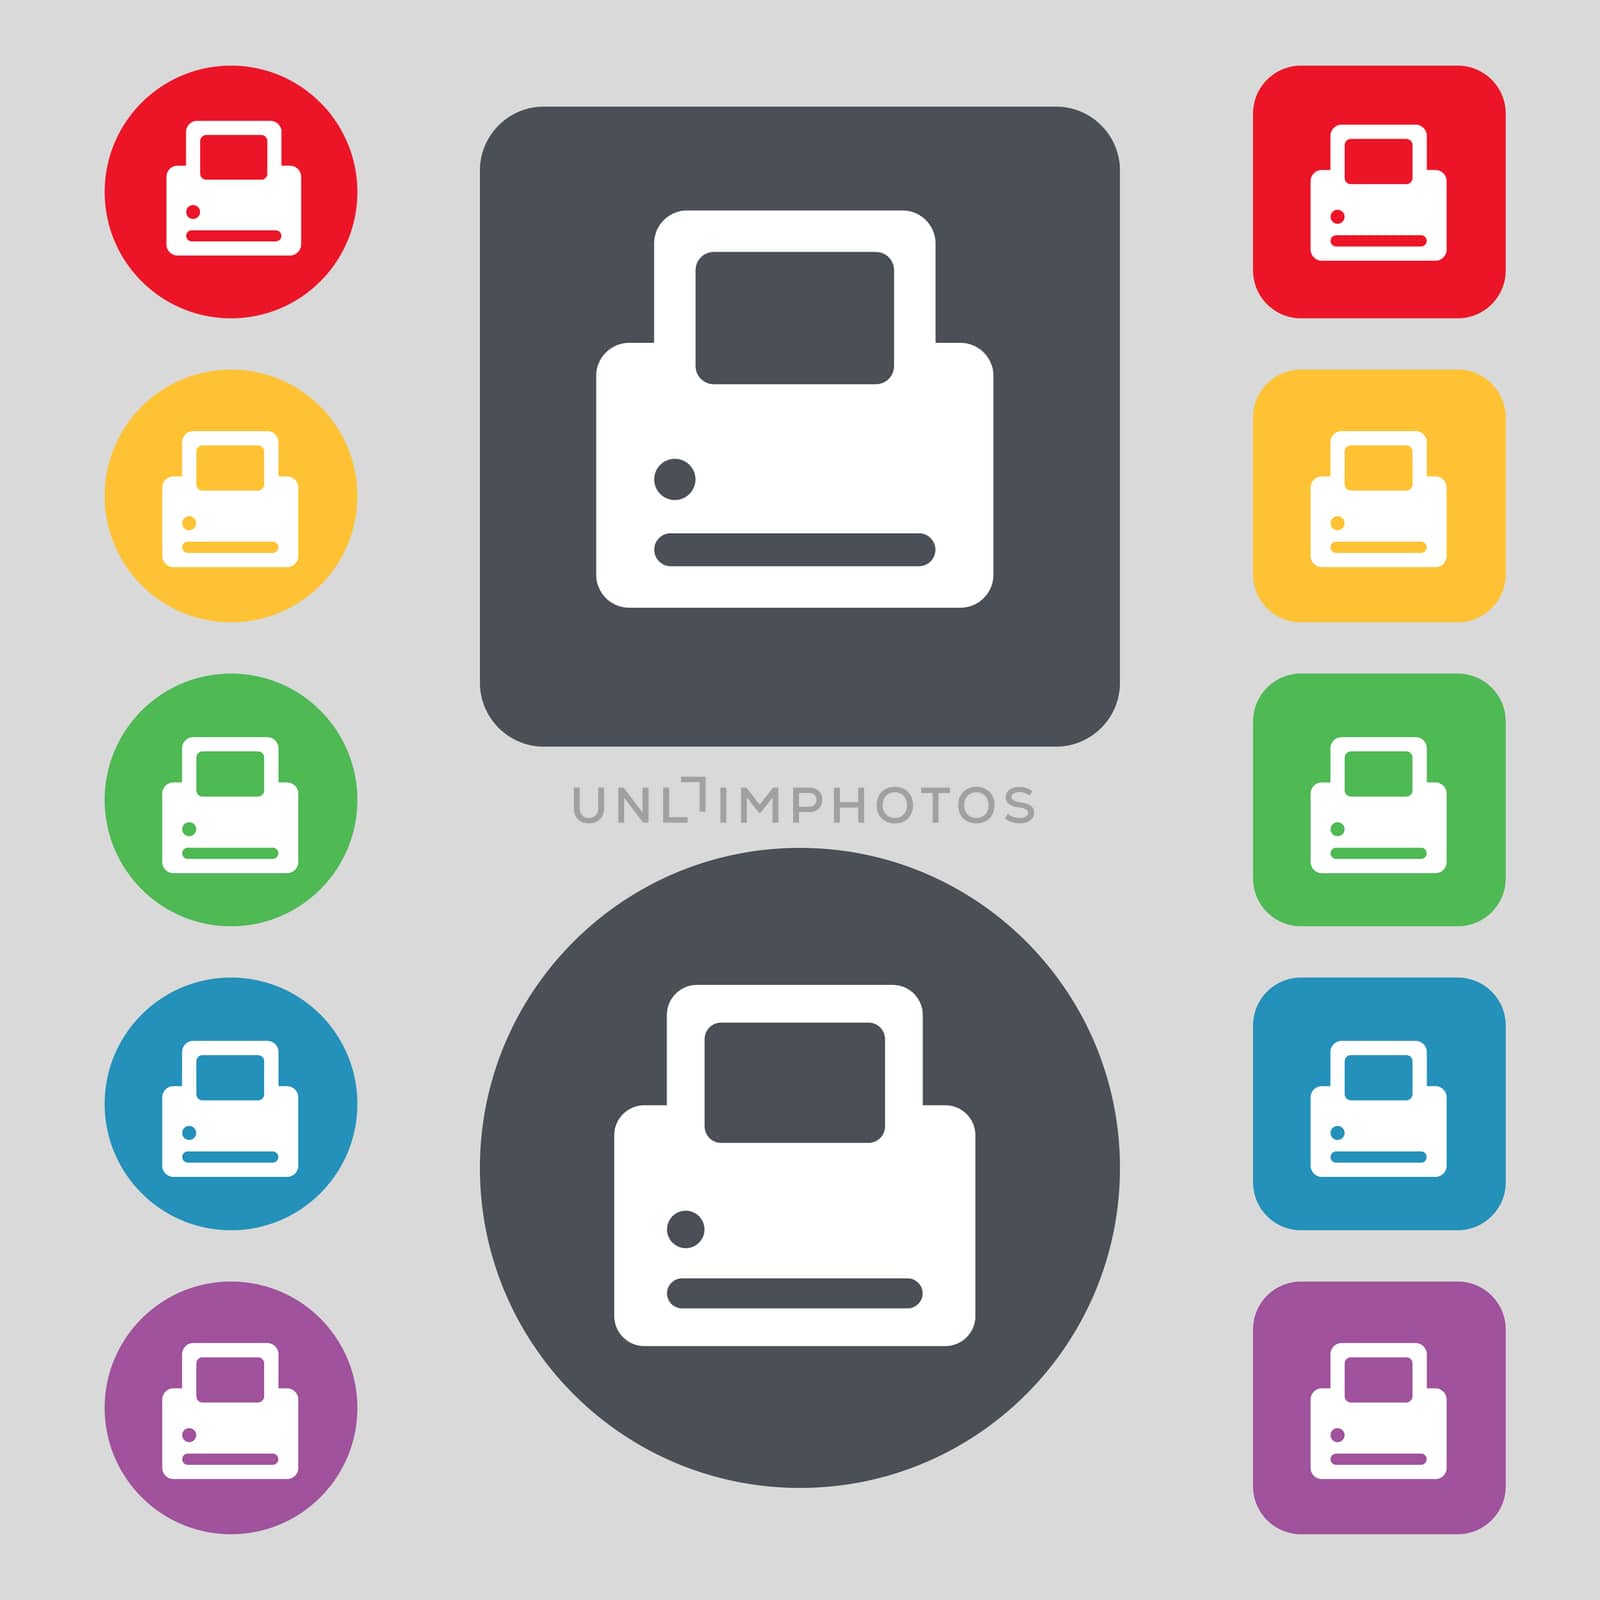 Printing icon sign. A set of 12 colored buttons. Flat design. illustration